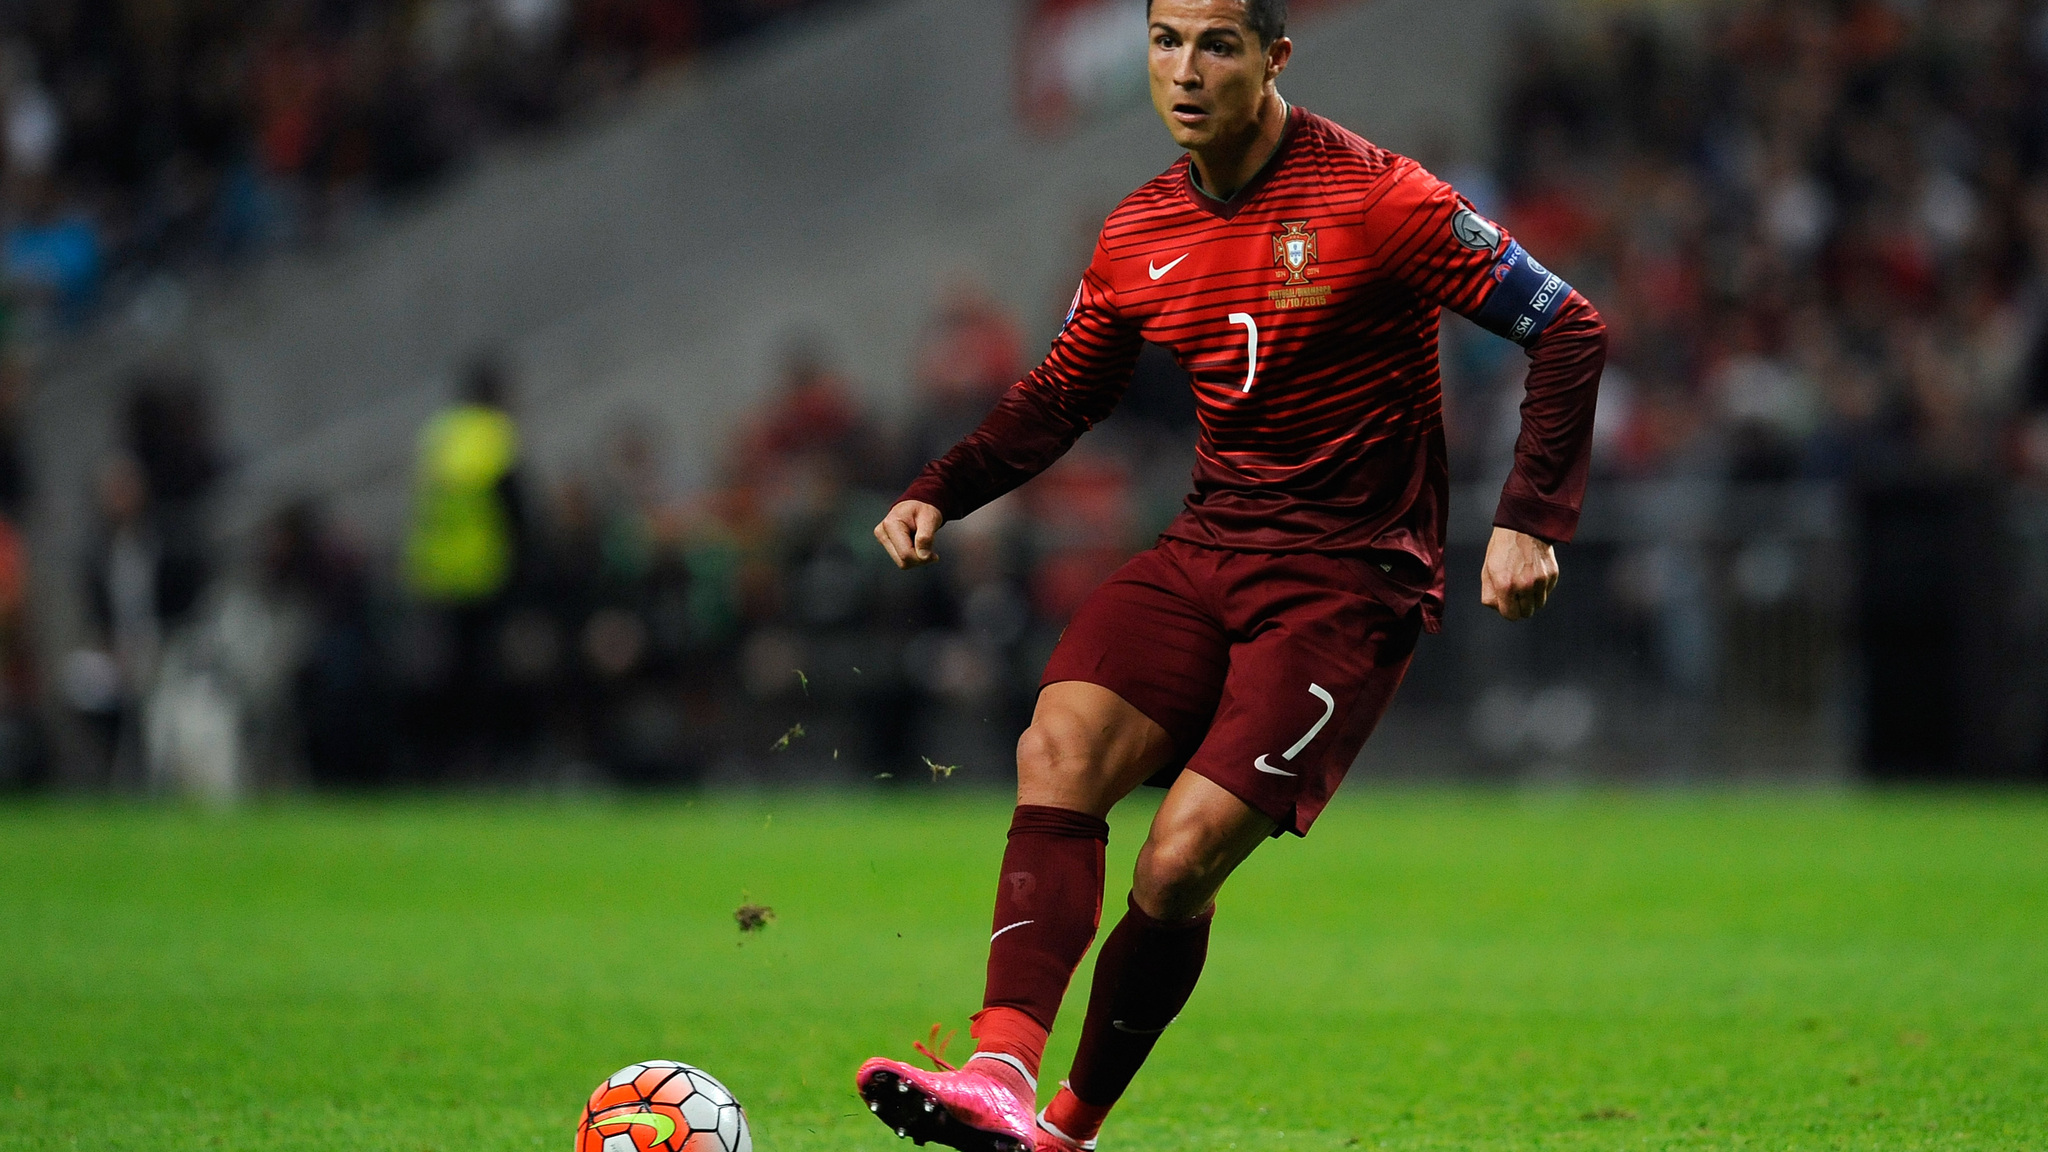 Free Cristiano Ronaldo Hd Kick Football Mobile Desktop Background Download Wallpapers Pictures